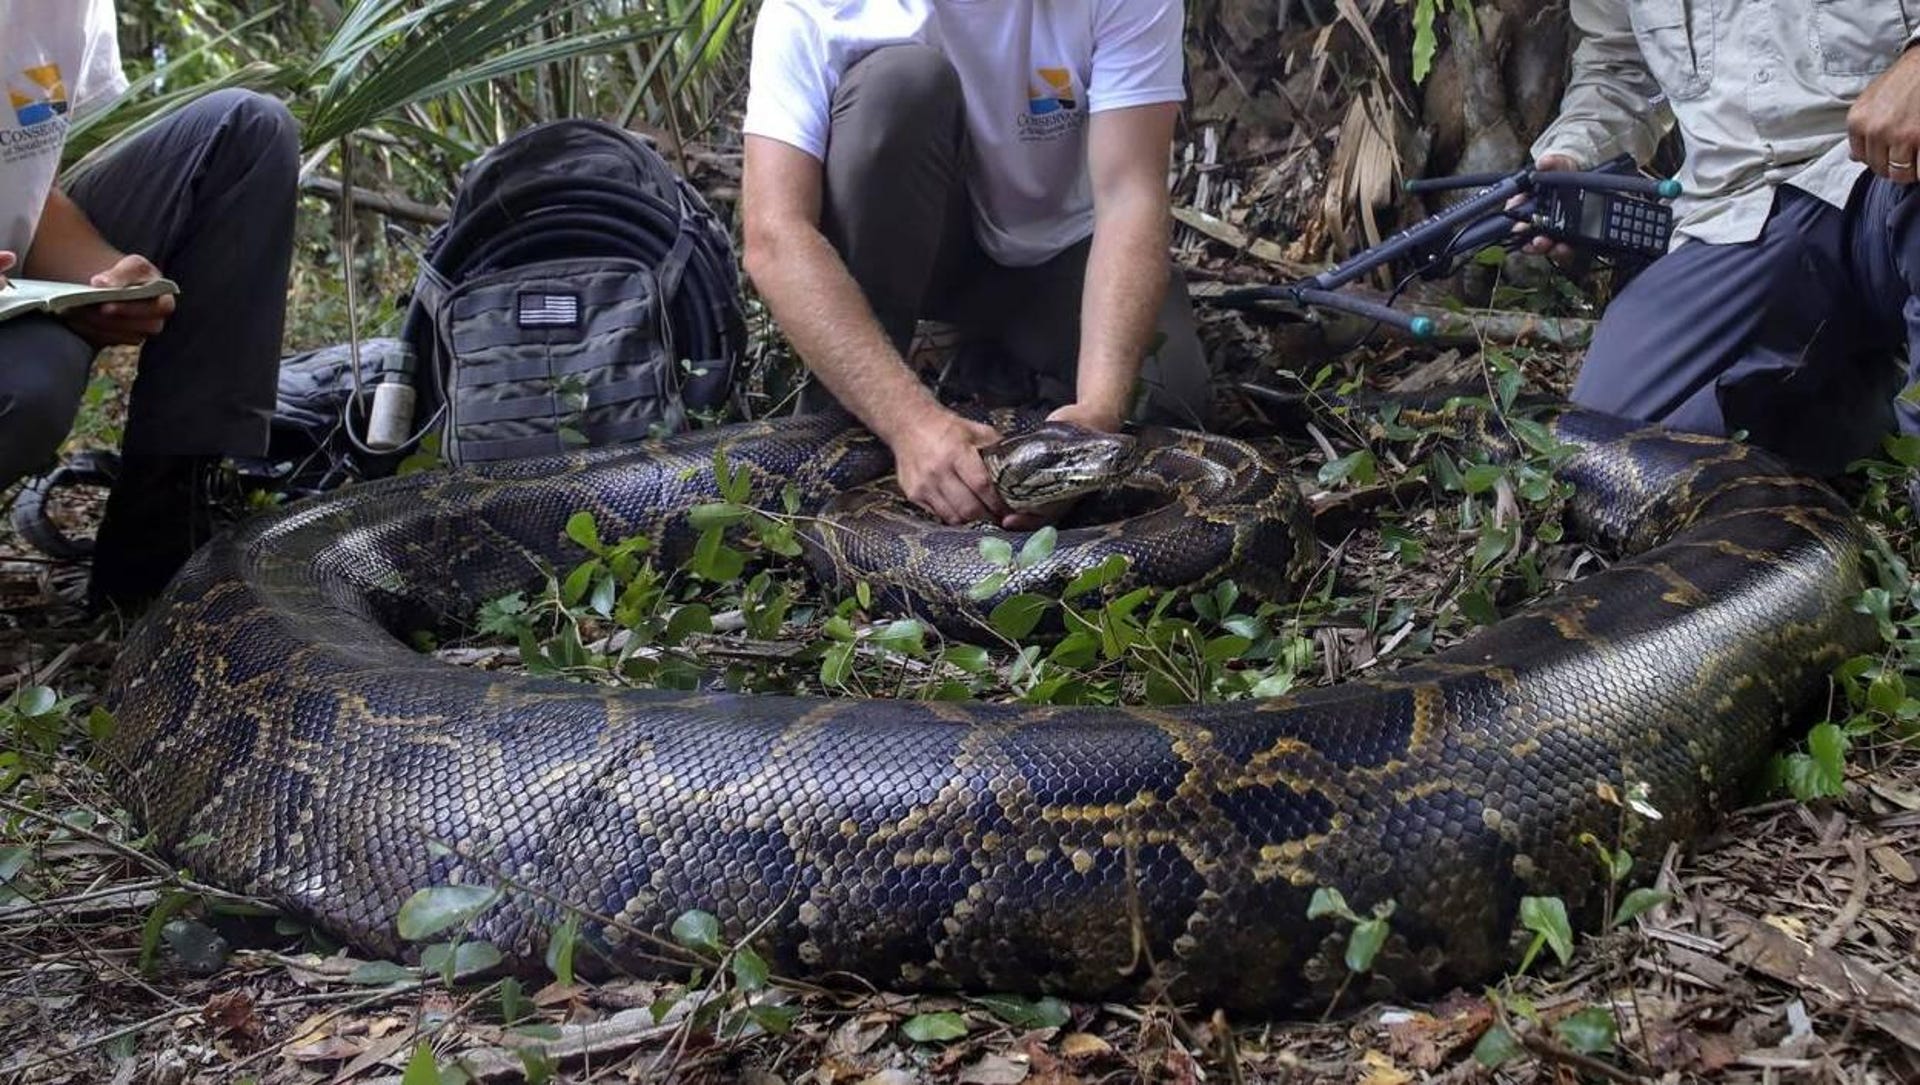 Three wildlife biologists crouch over a 215-pound python that is partially coiled up in a forest.